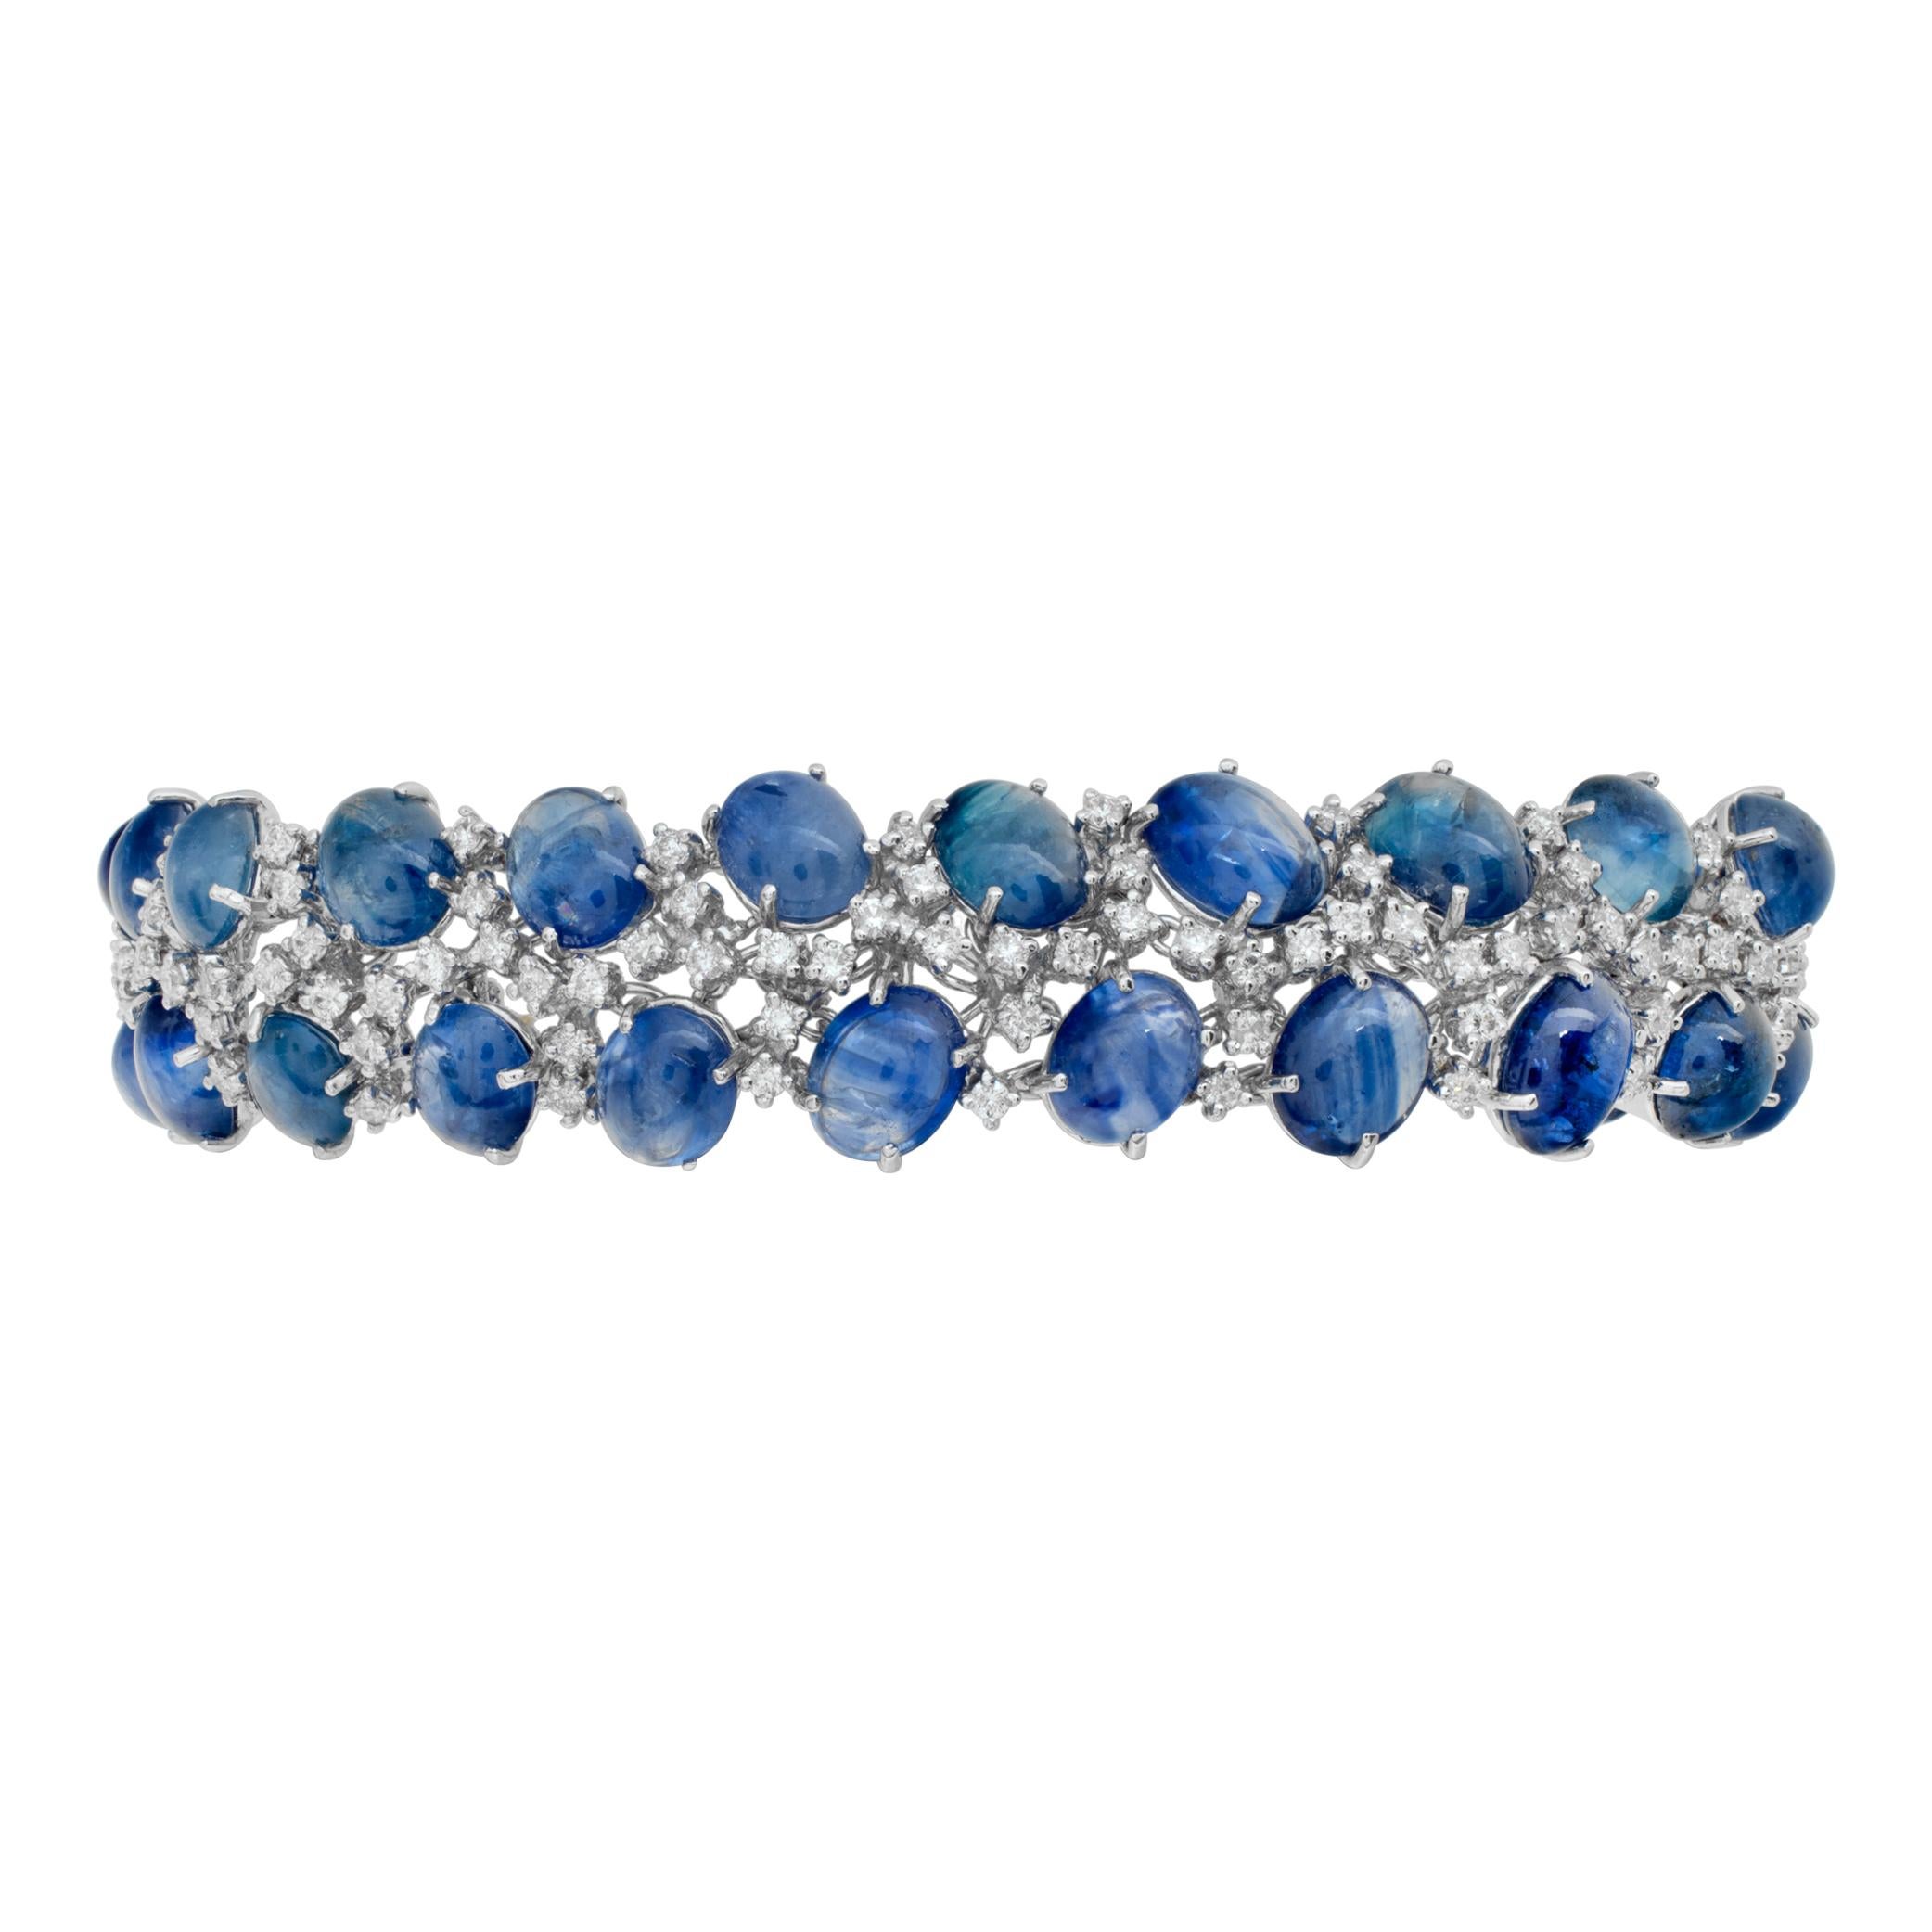 Cabochon Sapphire & diamond line bracelet in 18k white gold. Cabochon sapphire total approx. weigth: 50.00 carats. Round brilliant cut diamonds total approx. weight: 2.72 carats, all white and eye clean.  Length 7 inches, width 0.6 inch.